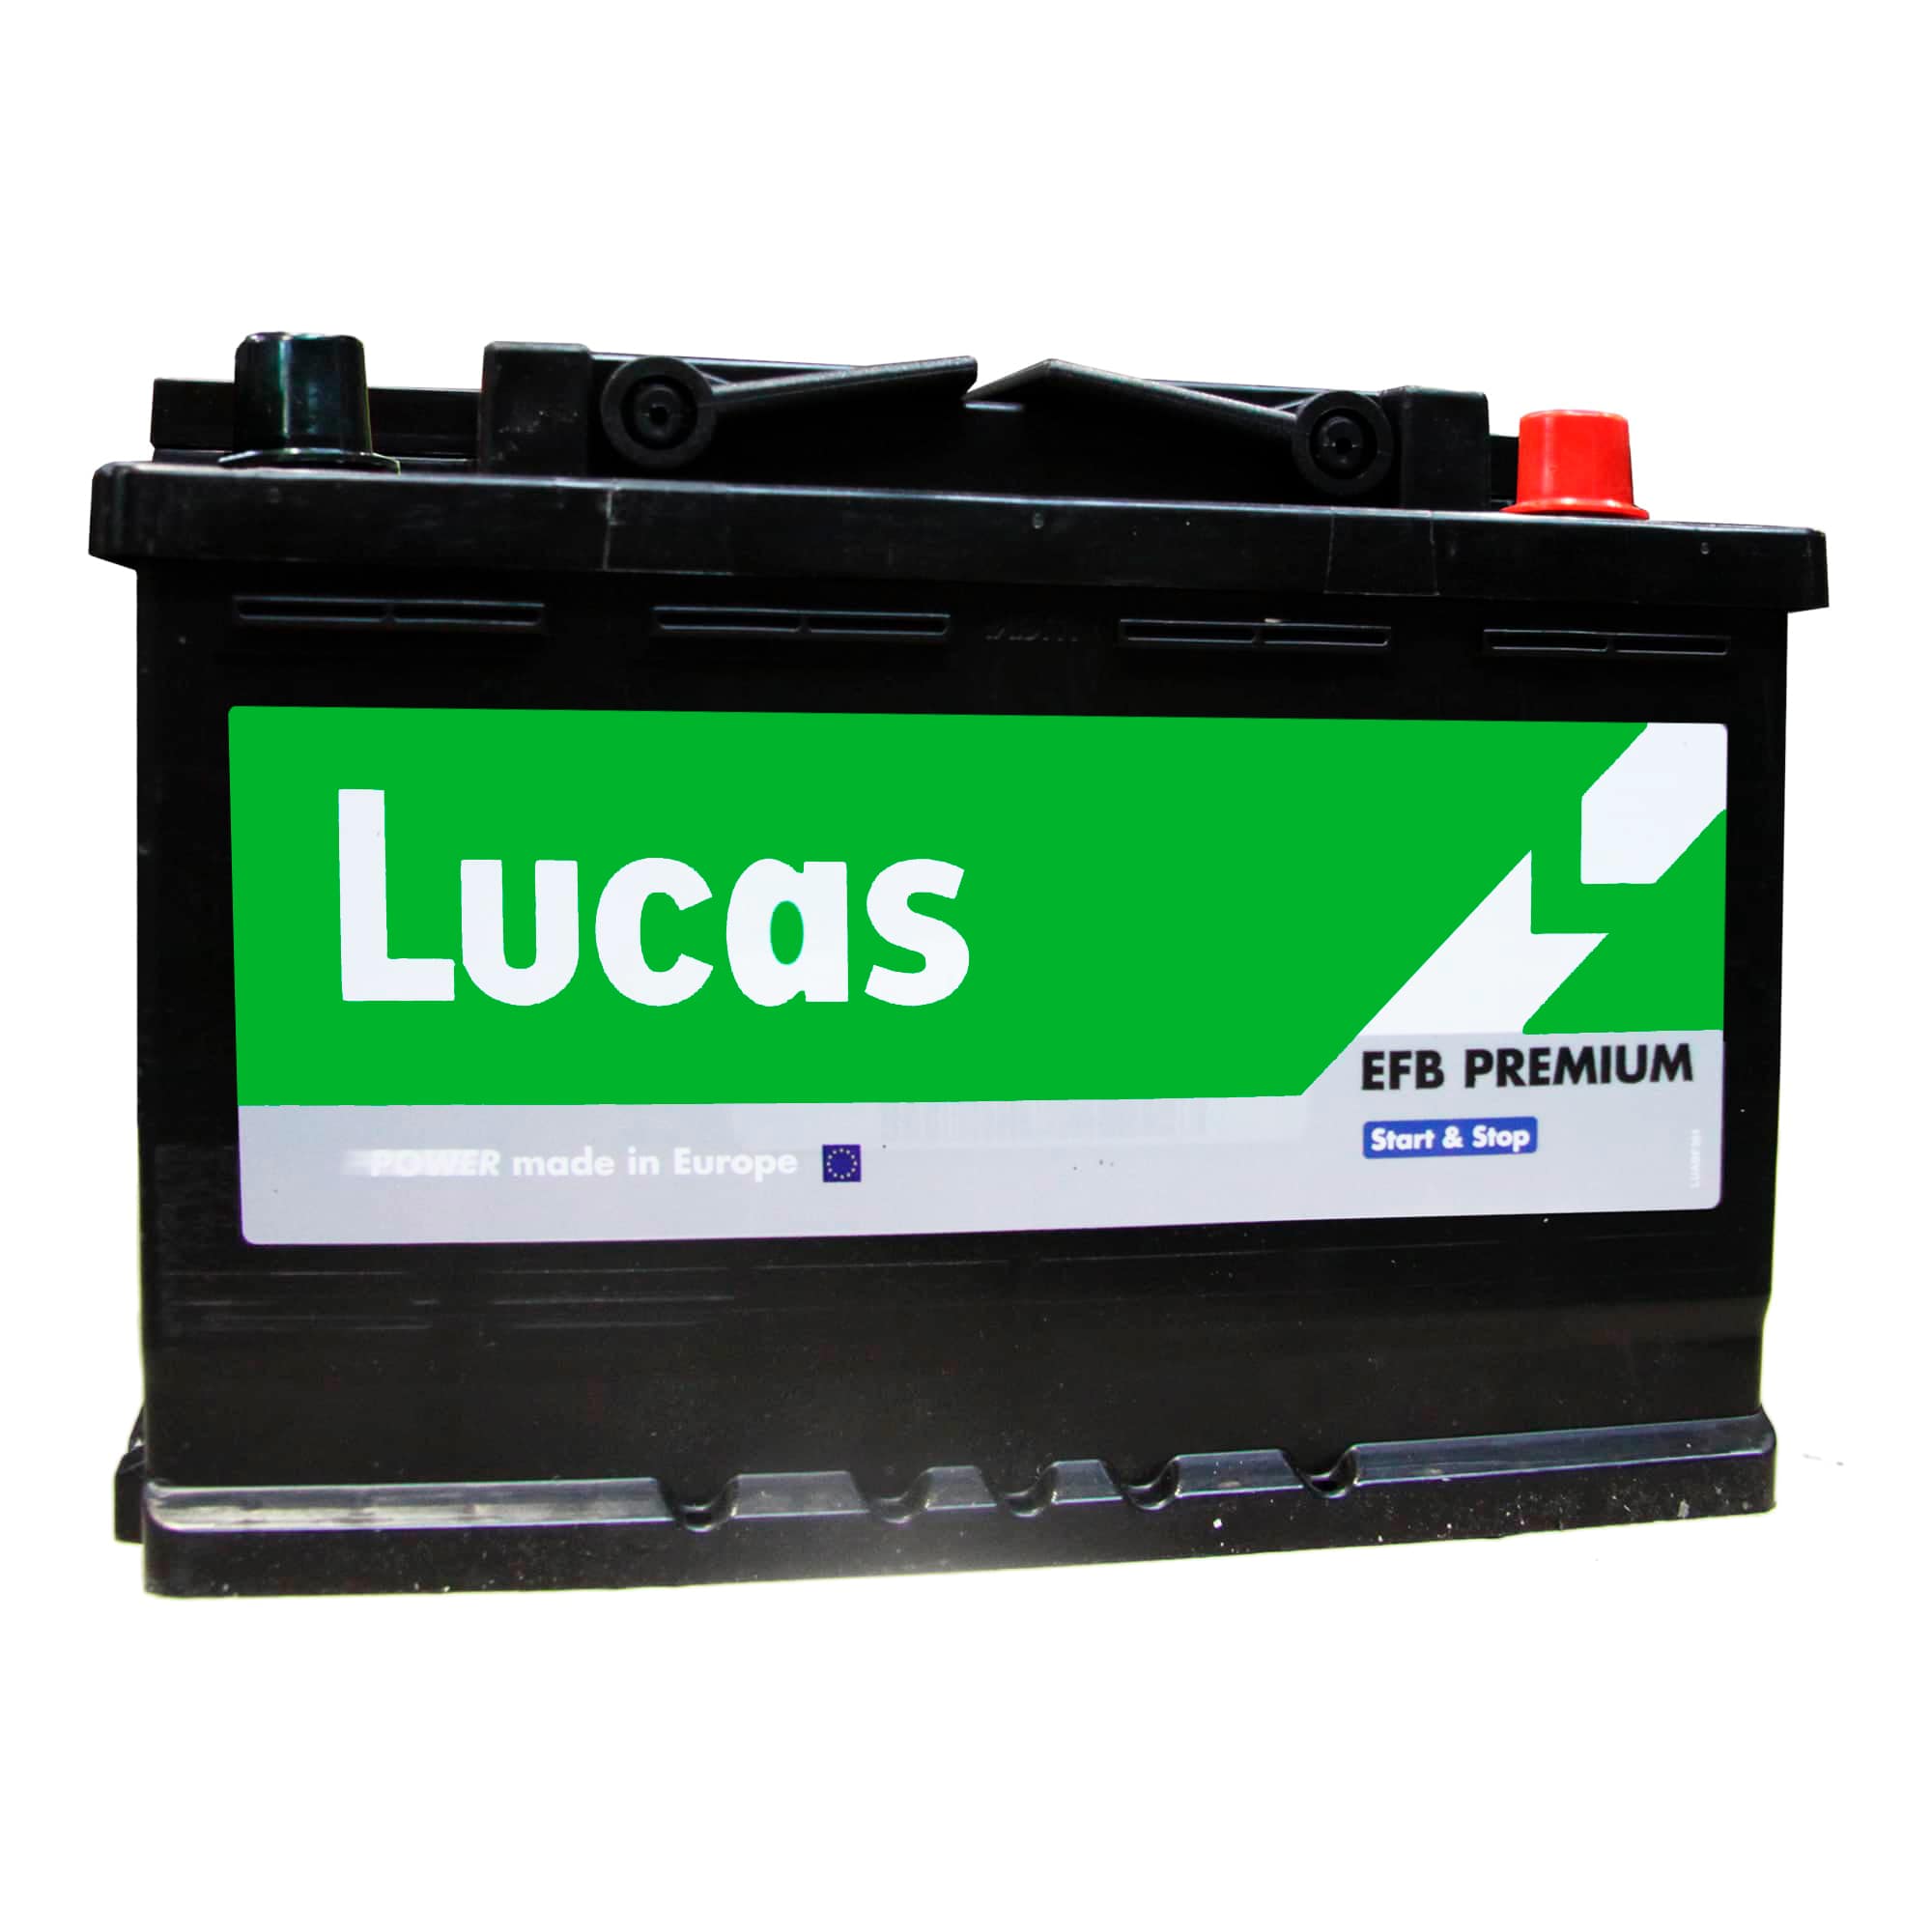 Аккумулятор Lucas (Batteries manufactured by Exide in Spain) 6CT-70Ah (-/+) EFB (LBEFB003A)